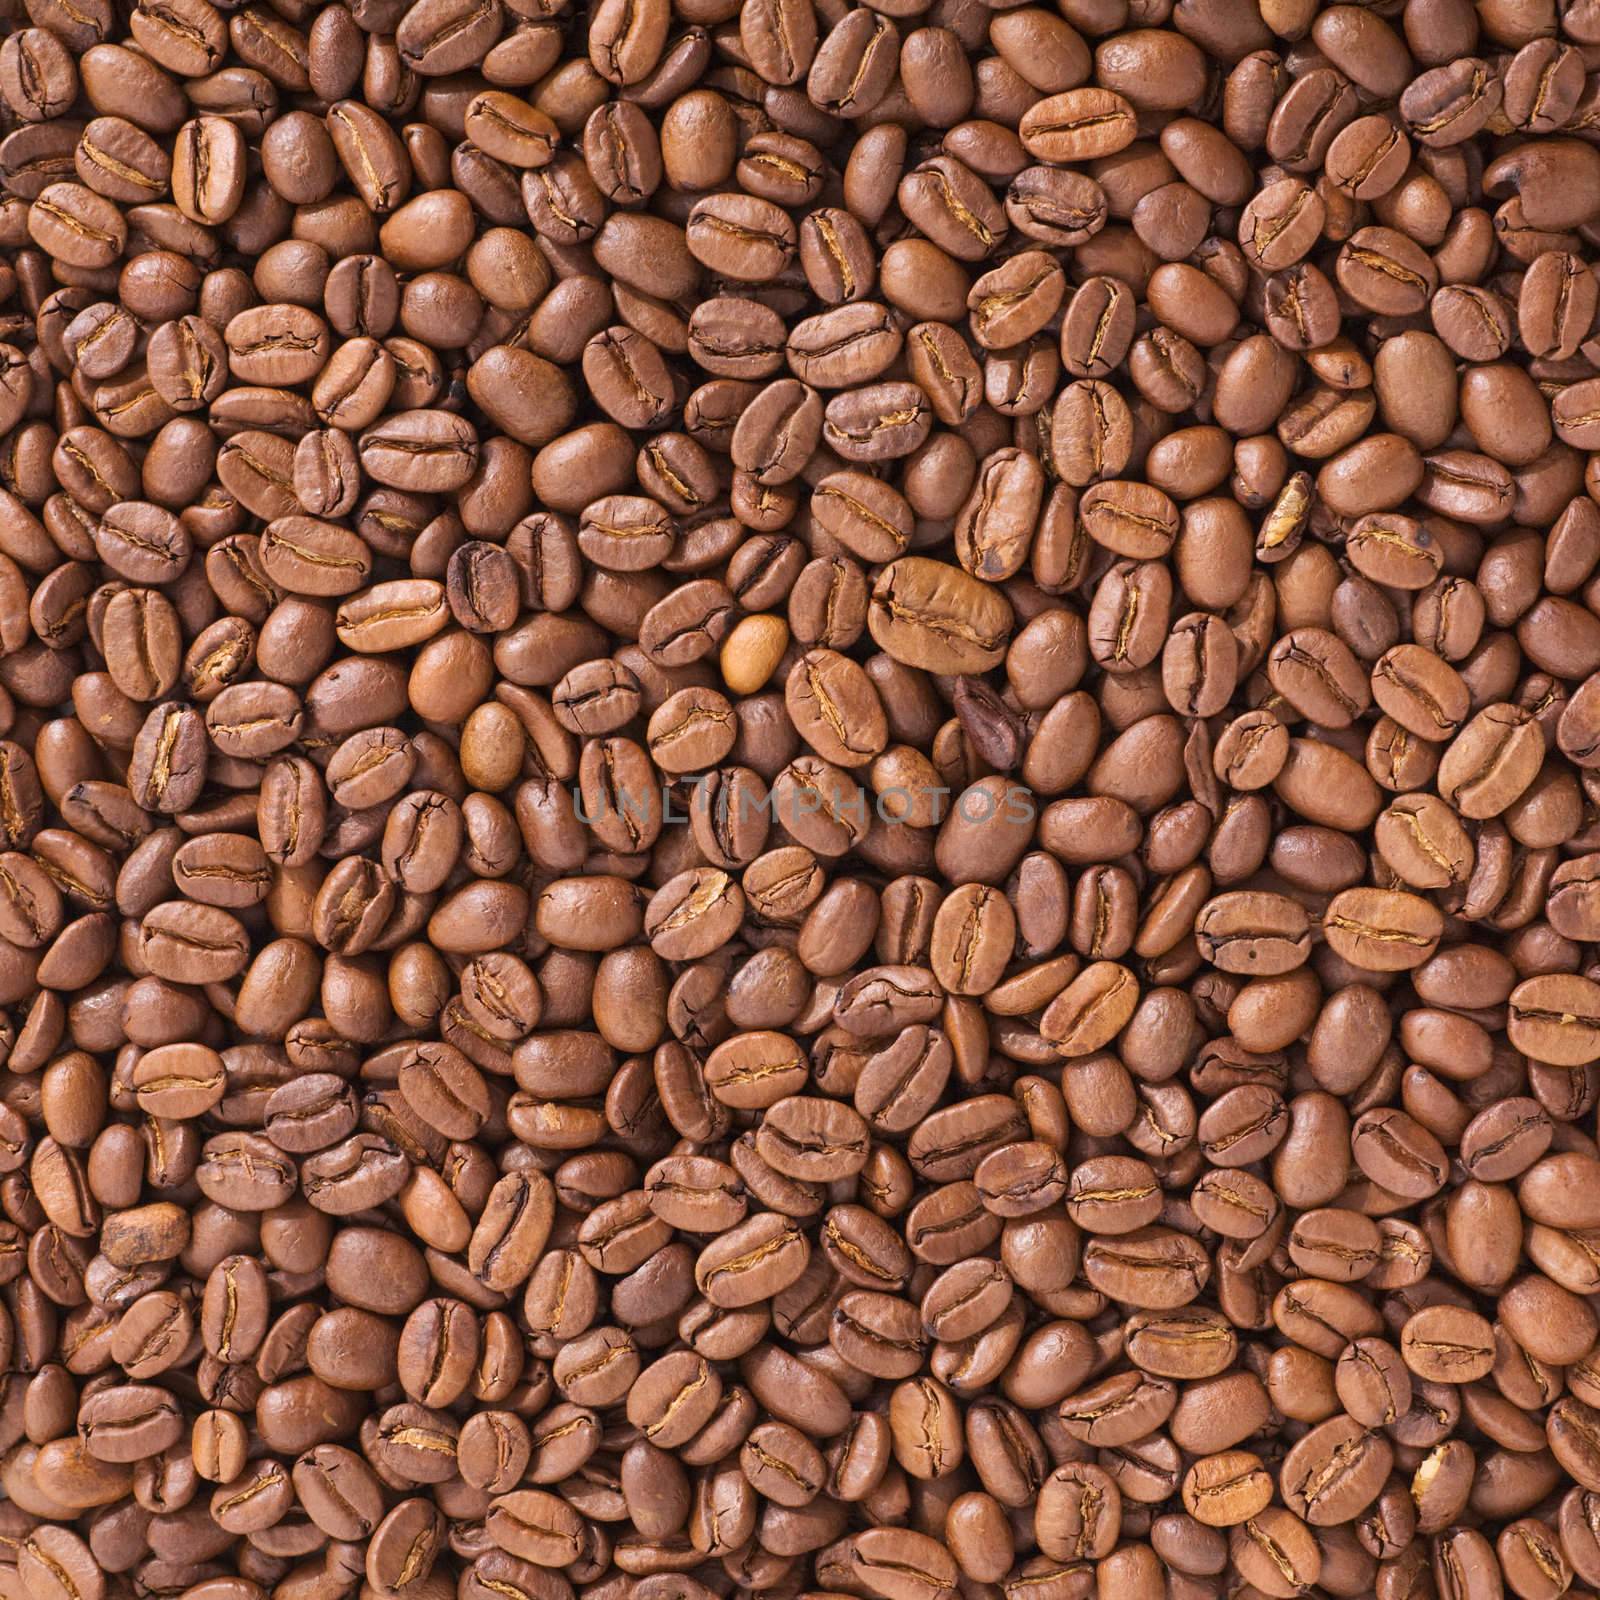 Texture generated by dark fried coffee beans